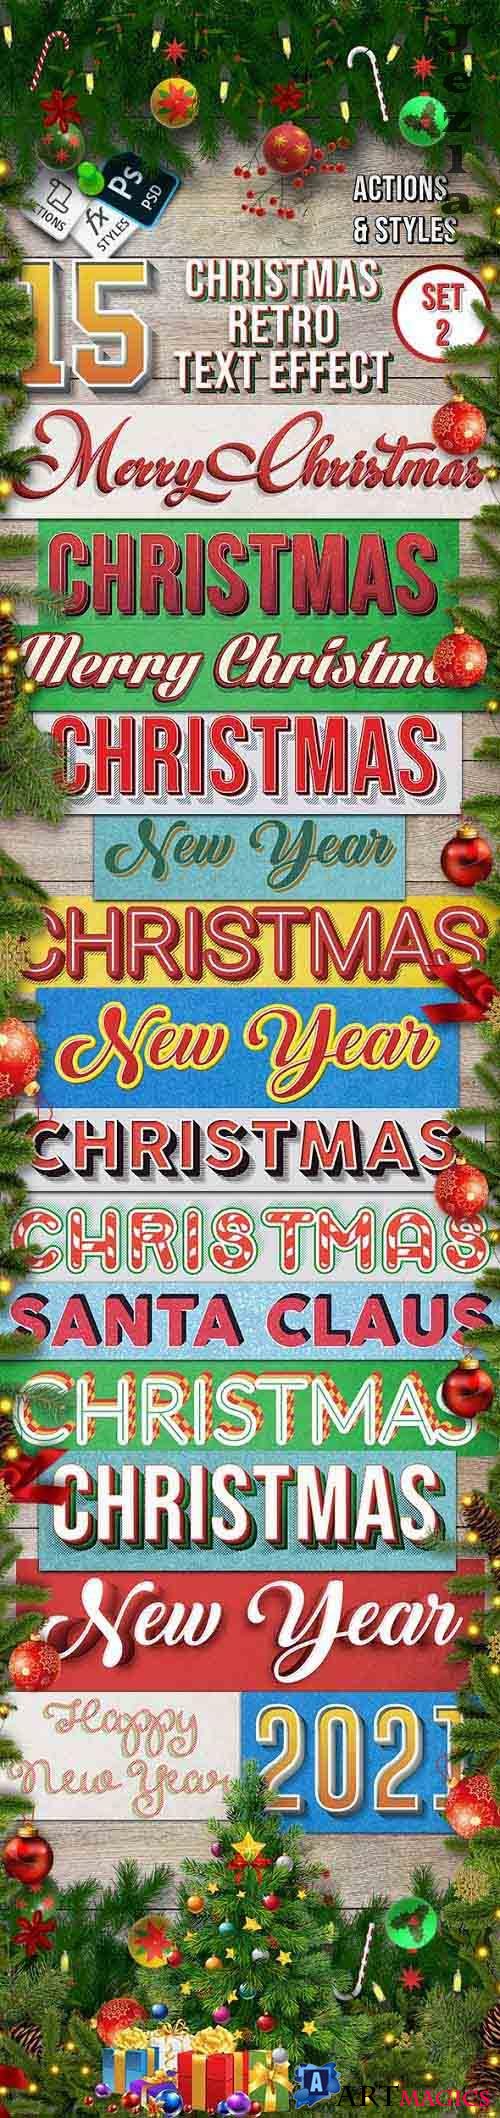 GraphicRiver - Christmas Retro Text Effect Set 2 - 15 Different Styles 29417802